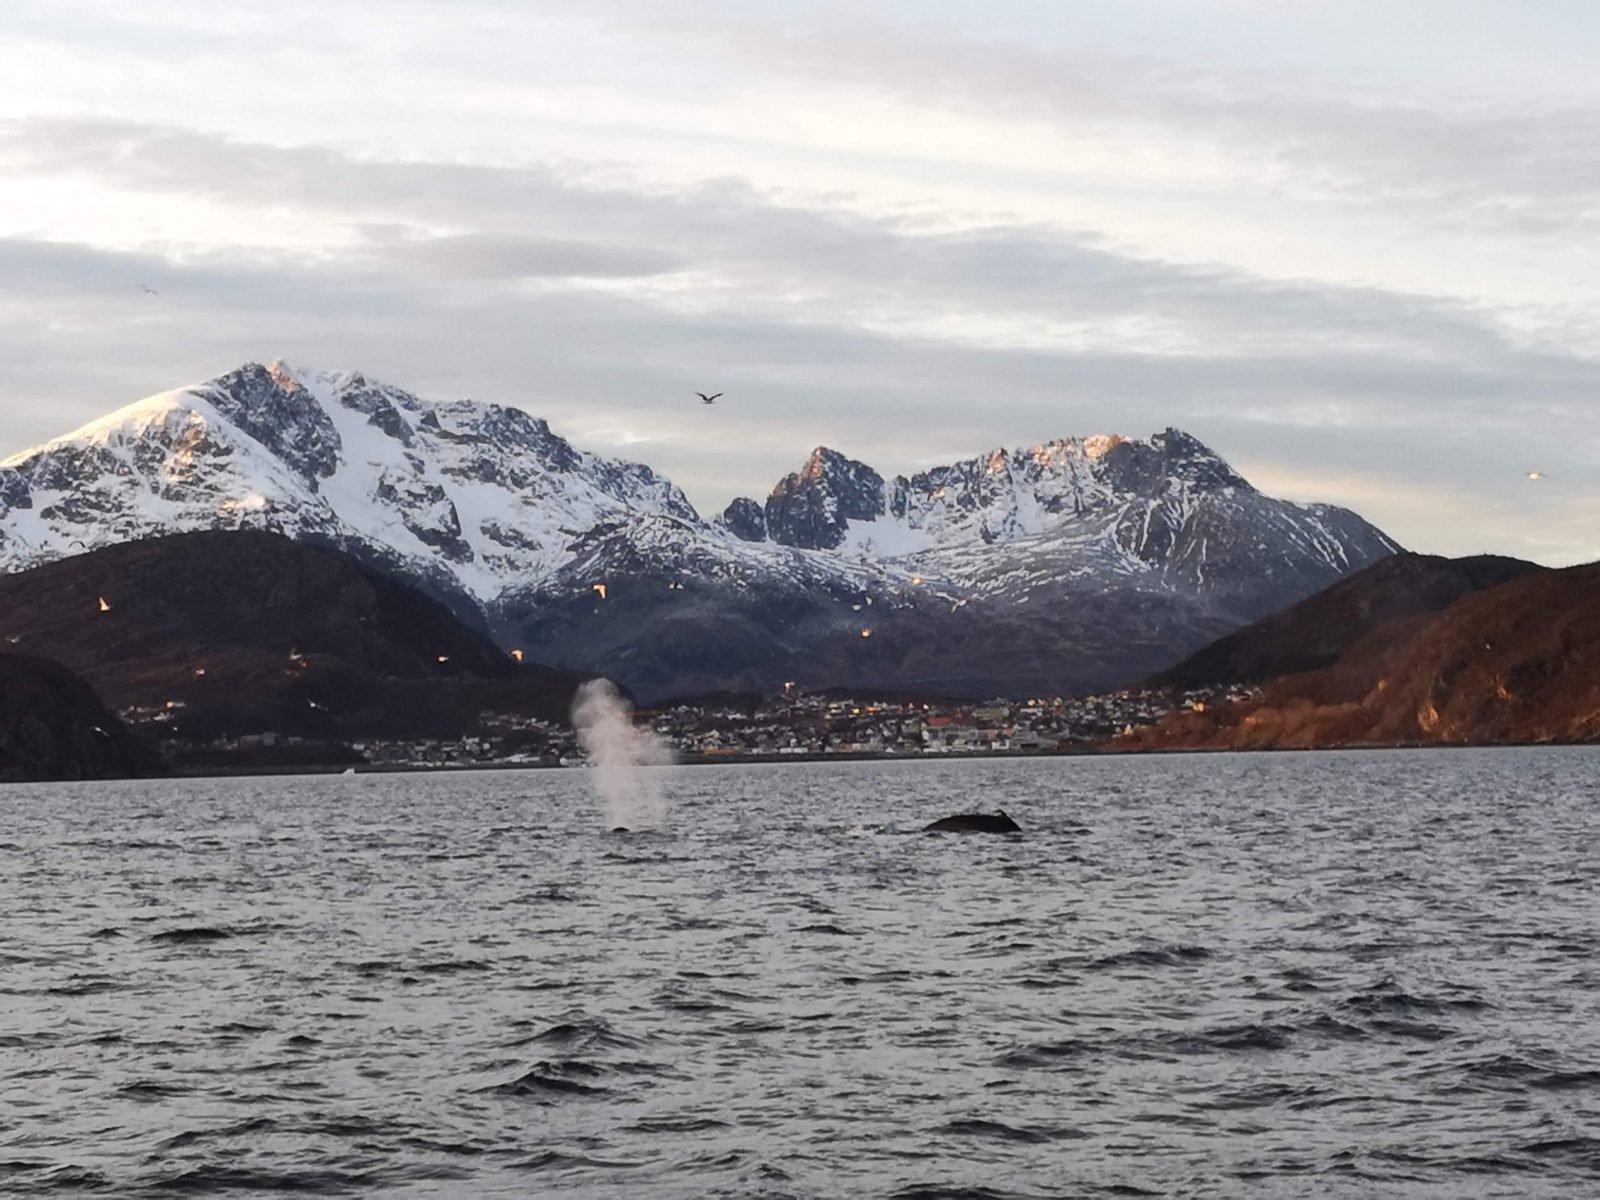 A whale is spotted on an arctic safari in front of the Norwegian Fjords of Tromso.